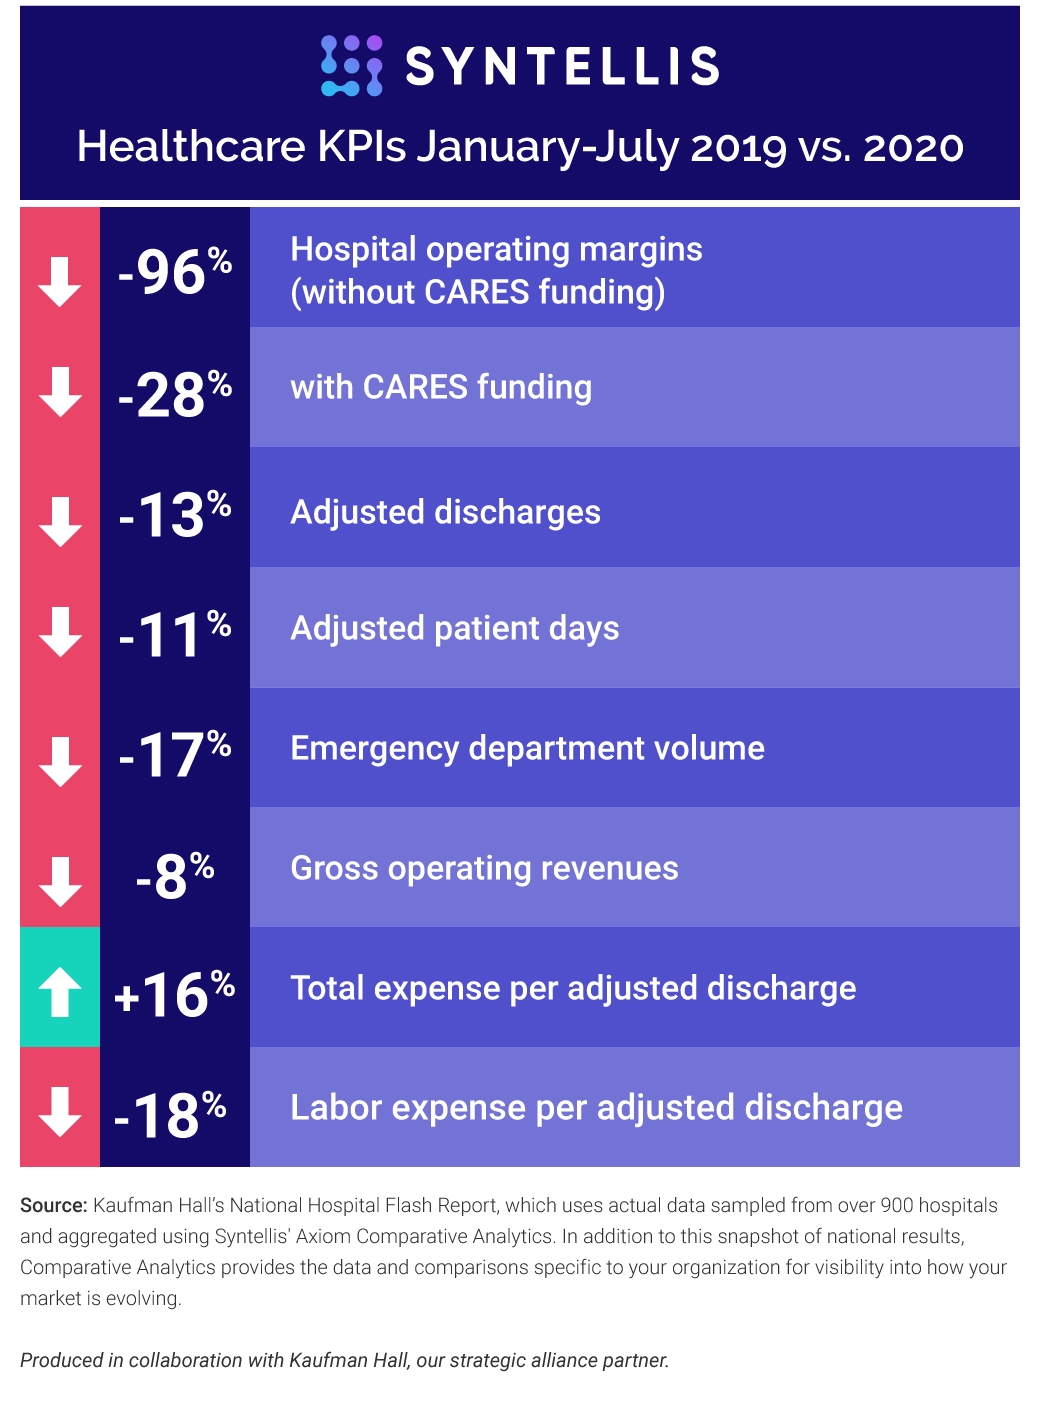 Healthcare KPIs January-July 2019 vs. 2020  -96% Hospital operating margins (without CARES funding) -28% with CARES funding  -13% Adjusted discharges   -11% Adjusted patient days  -17% Emergency department volume  -8% Gross operating revenues  +16% Total expense per adjusted discharge  +18% Labor expense per adjusted discharge